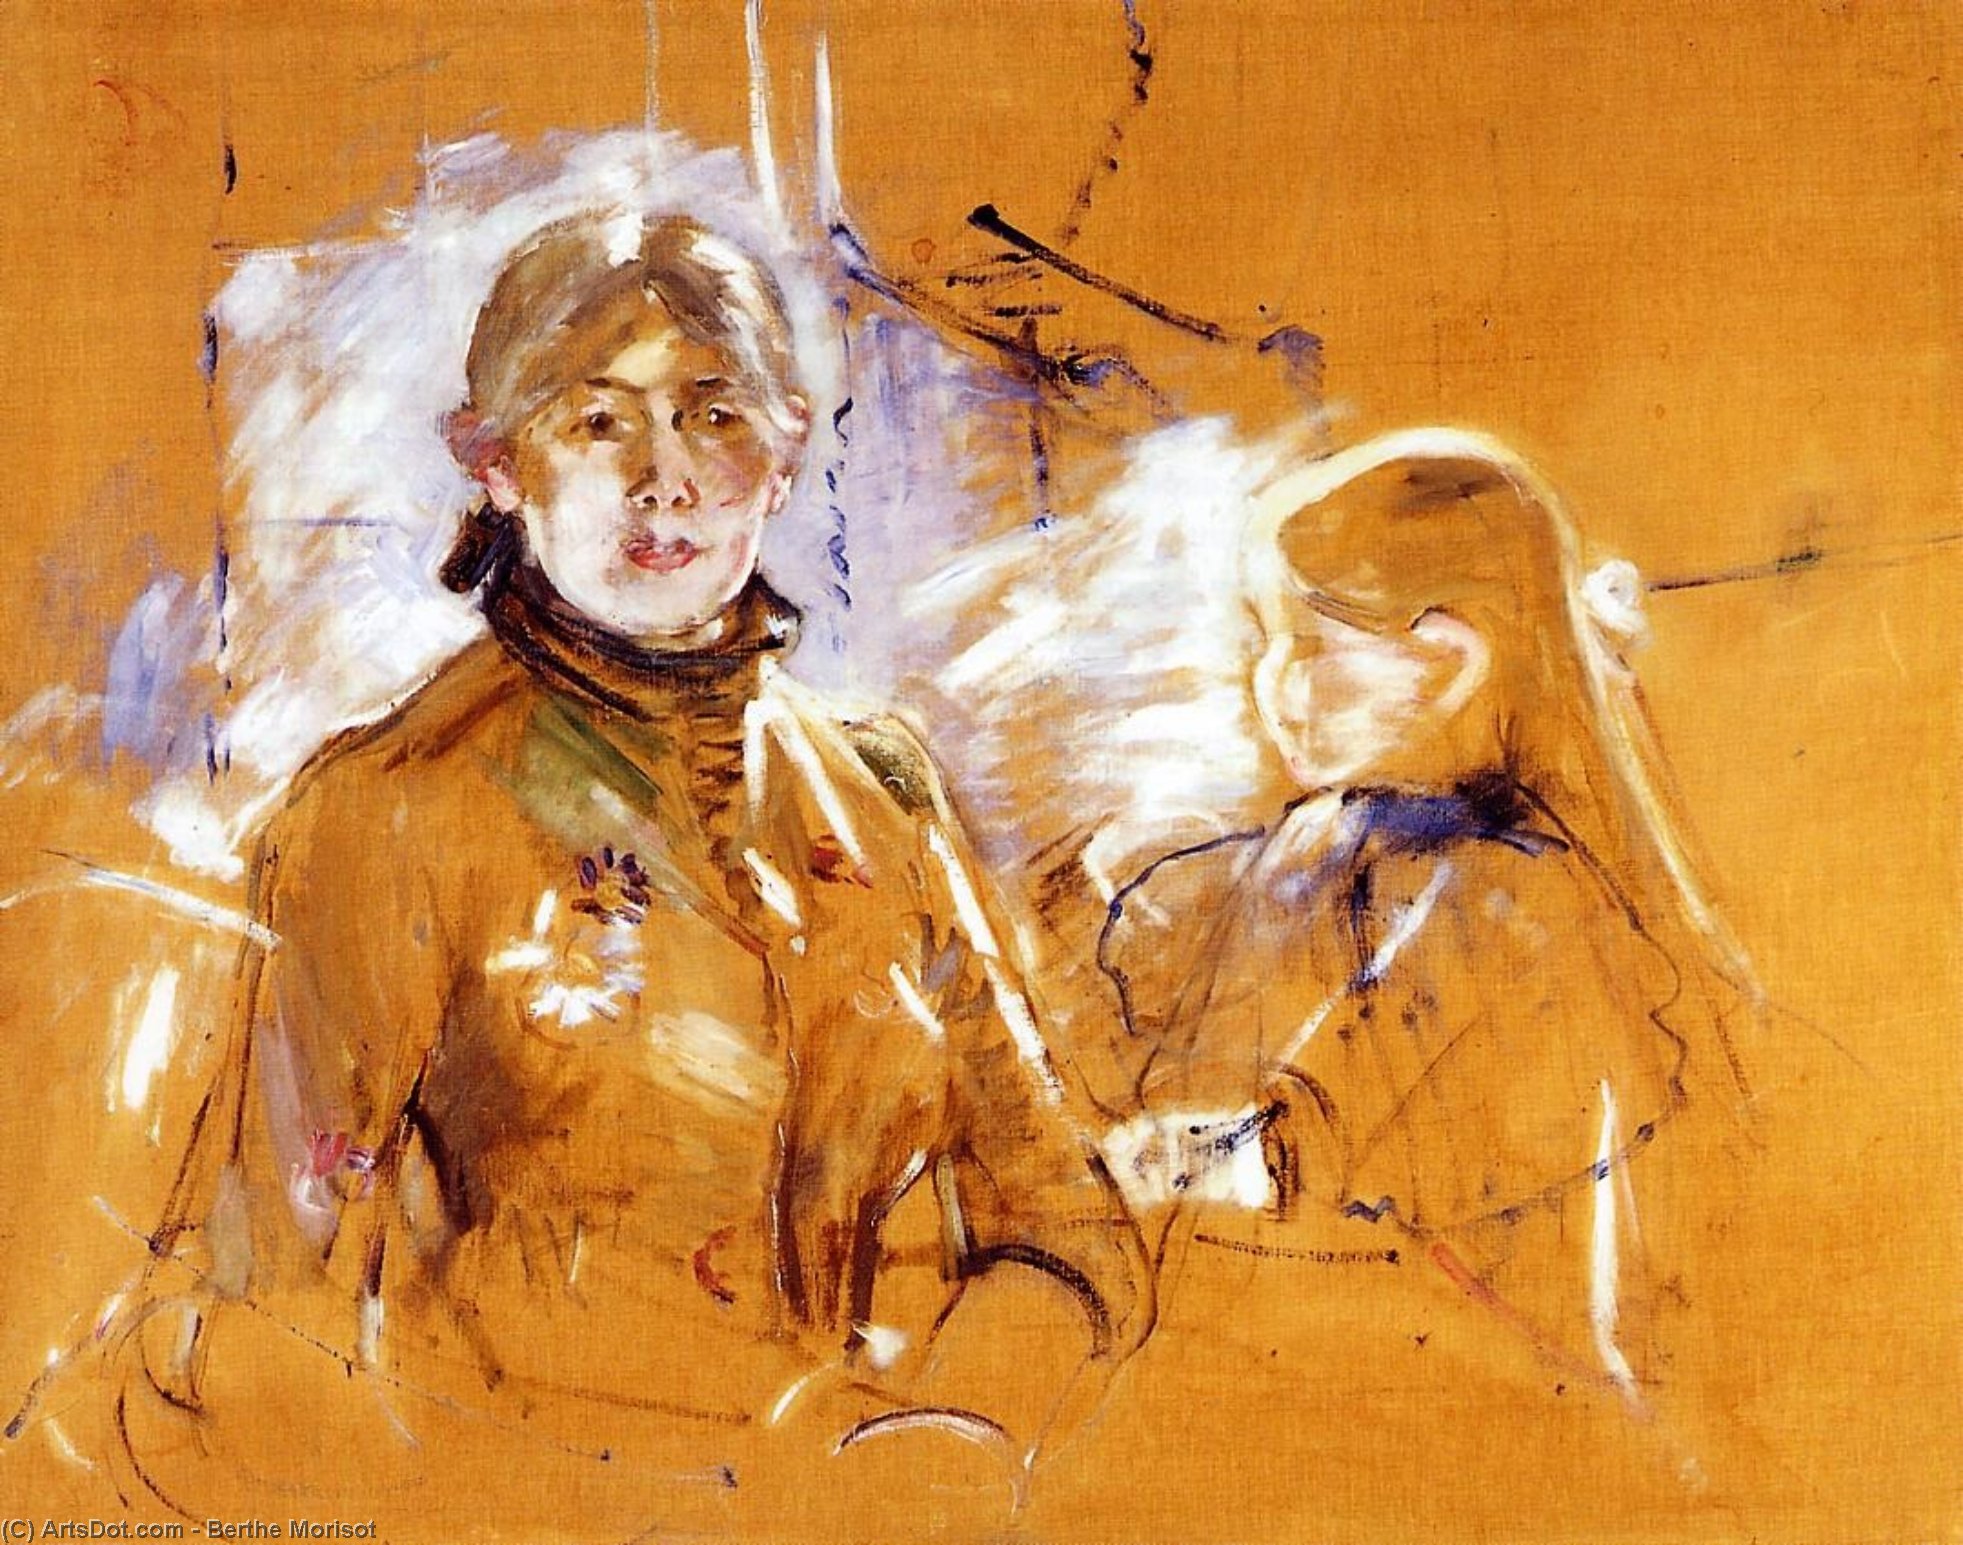 WikiOO.org - 백과 사전 - 회화, 삽화 Berthe Morisot - Portrait of Berthe Morisot and Her Daughter (also known as Self Portrait with Julie)